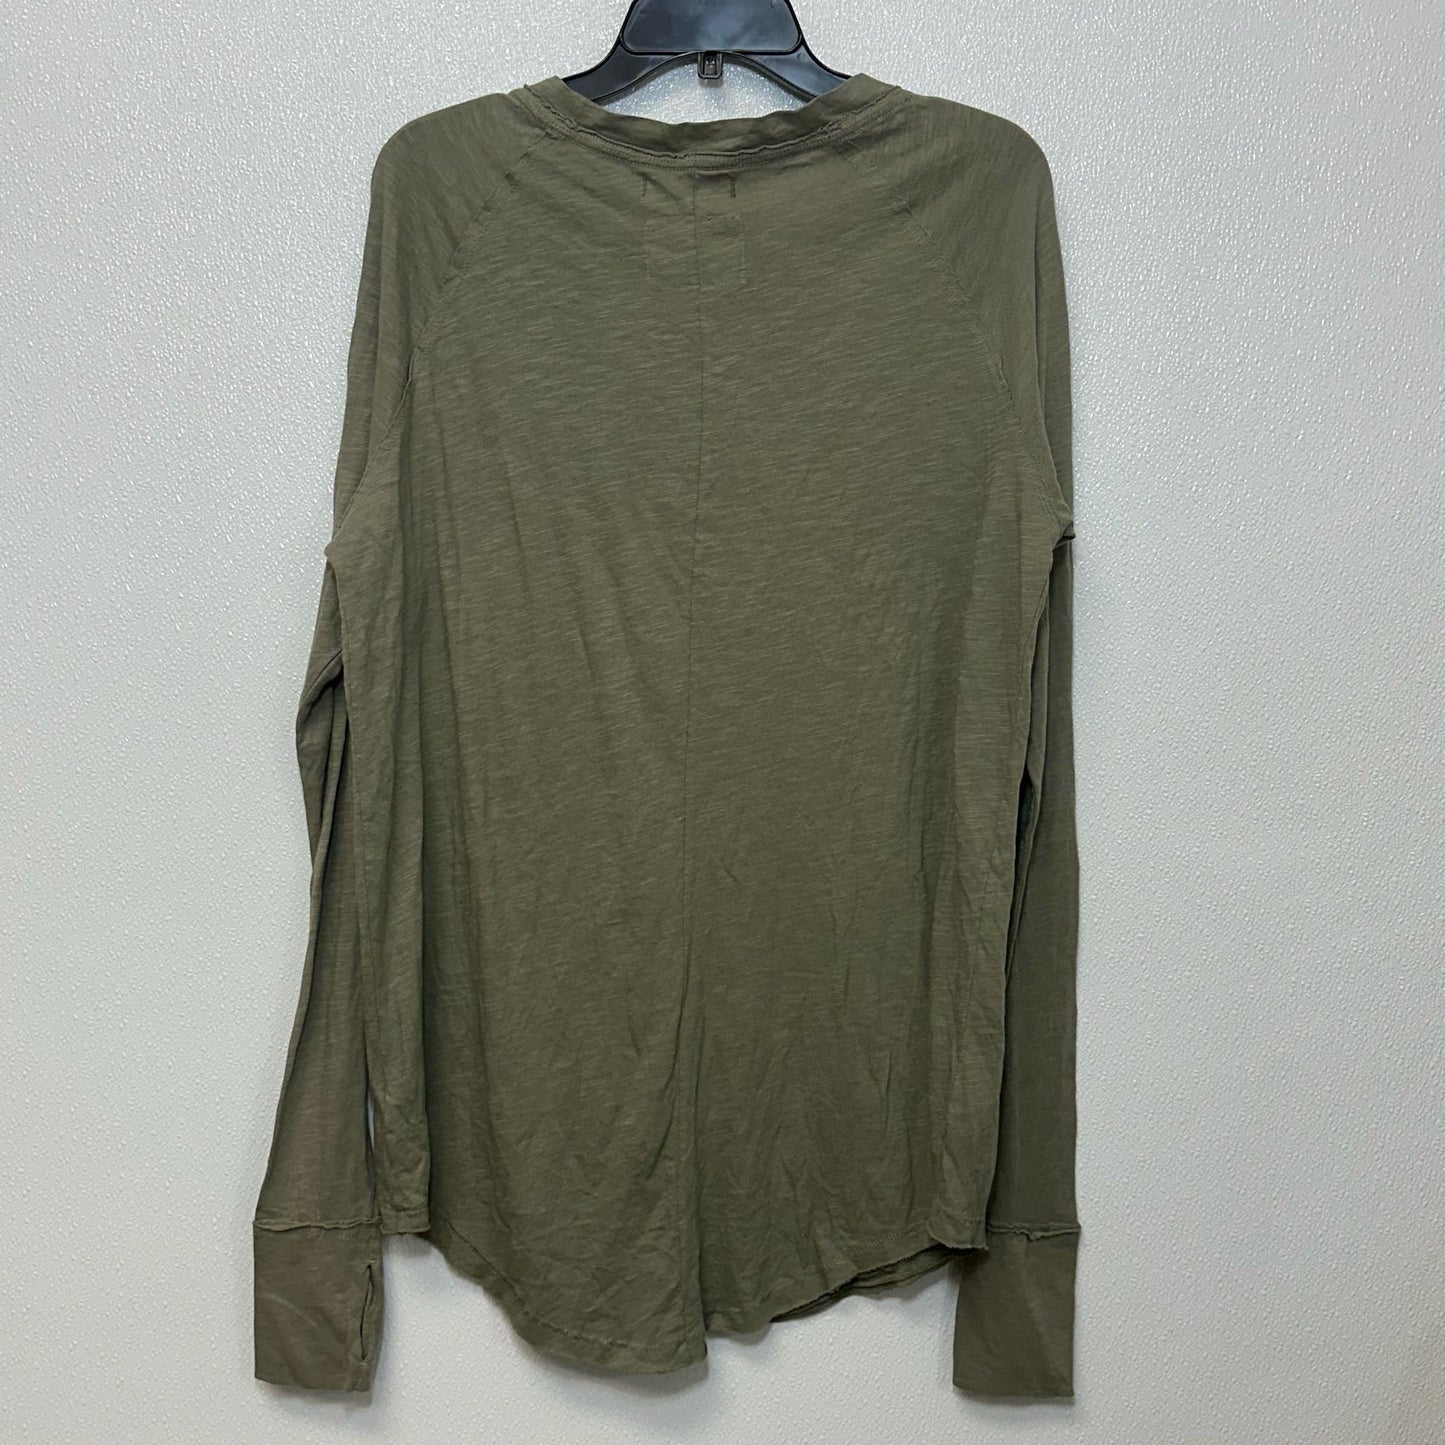 Olive Top Long Sleeve We The Free, Size S